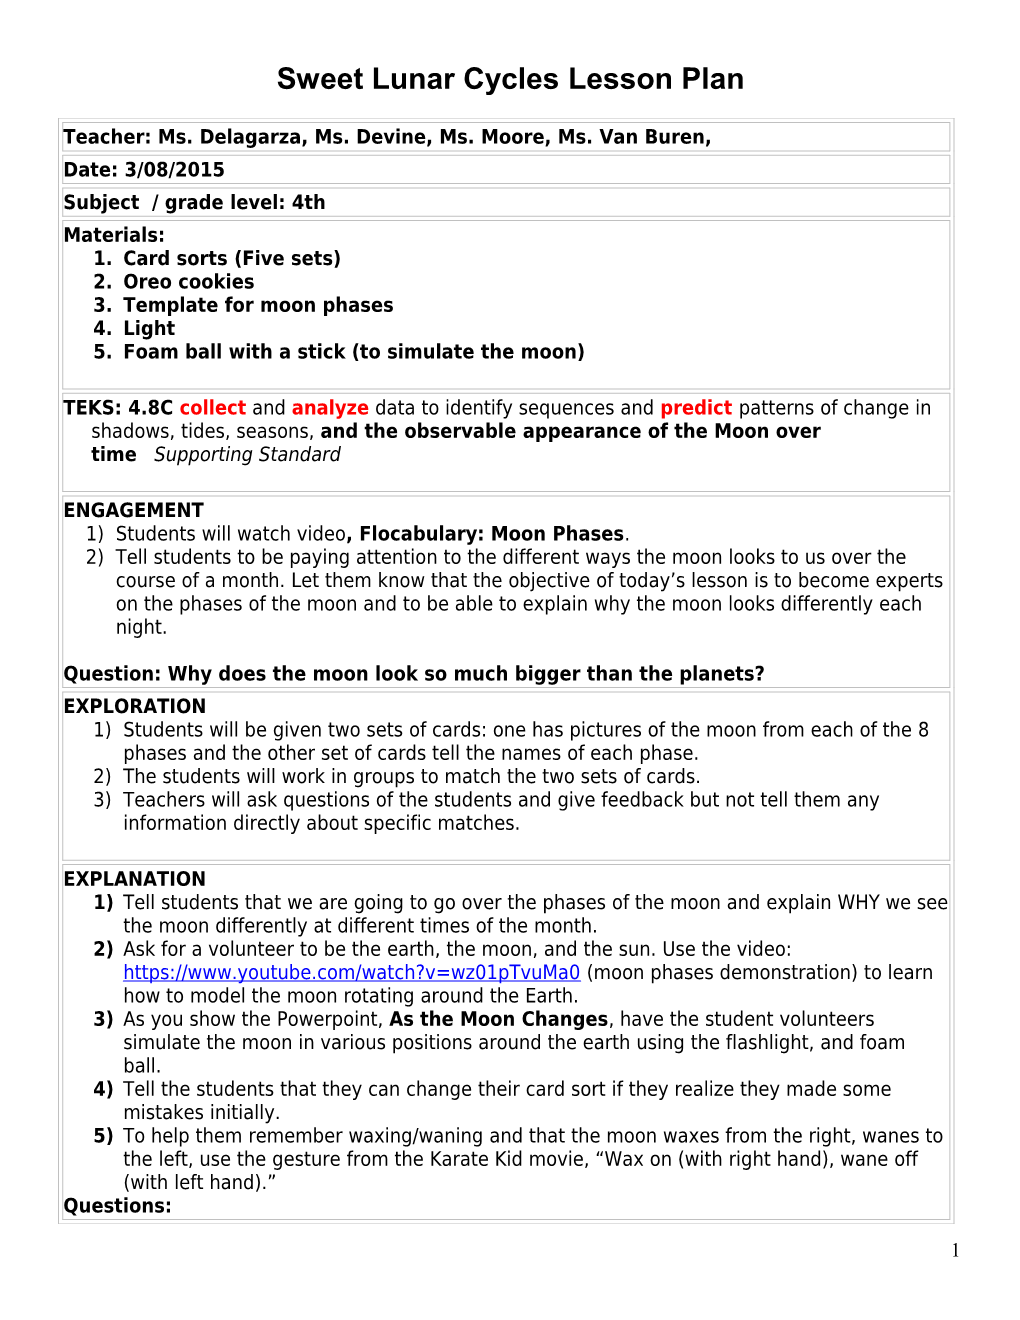 5E Student Lesson Planning Template s3